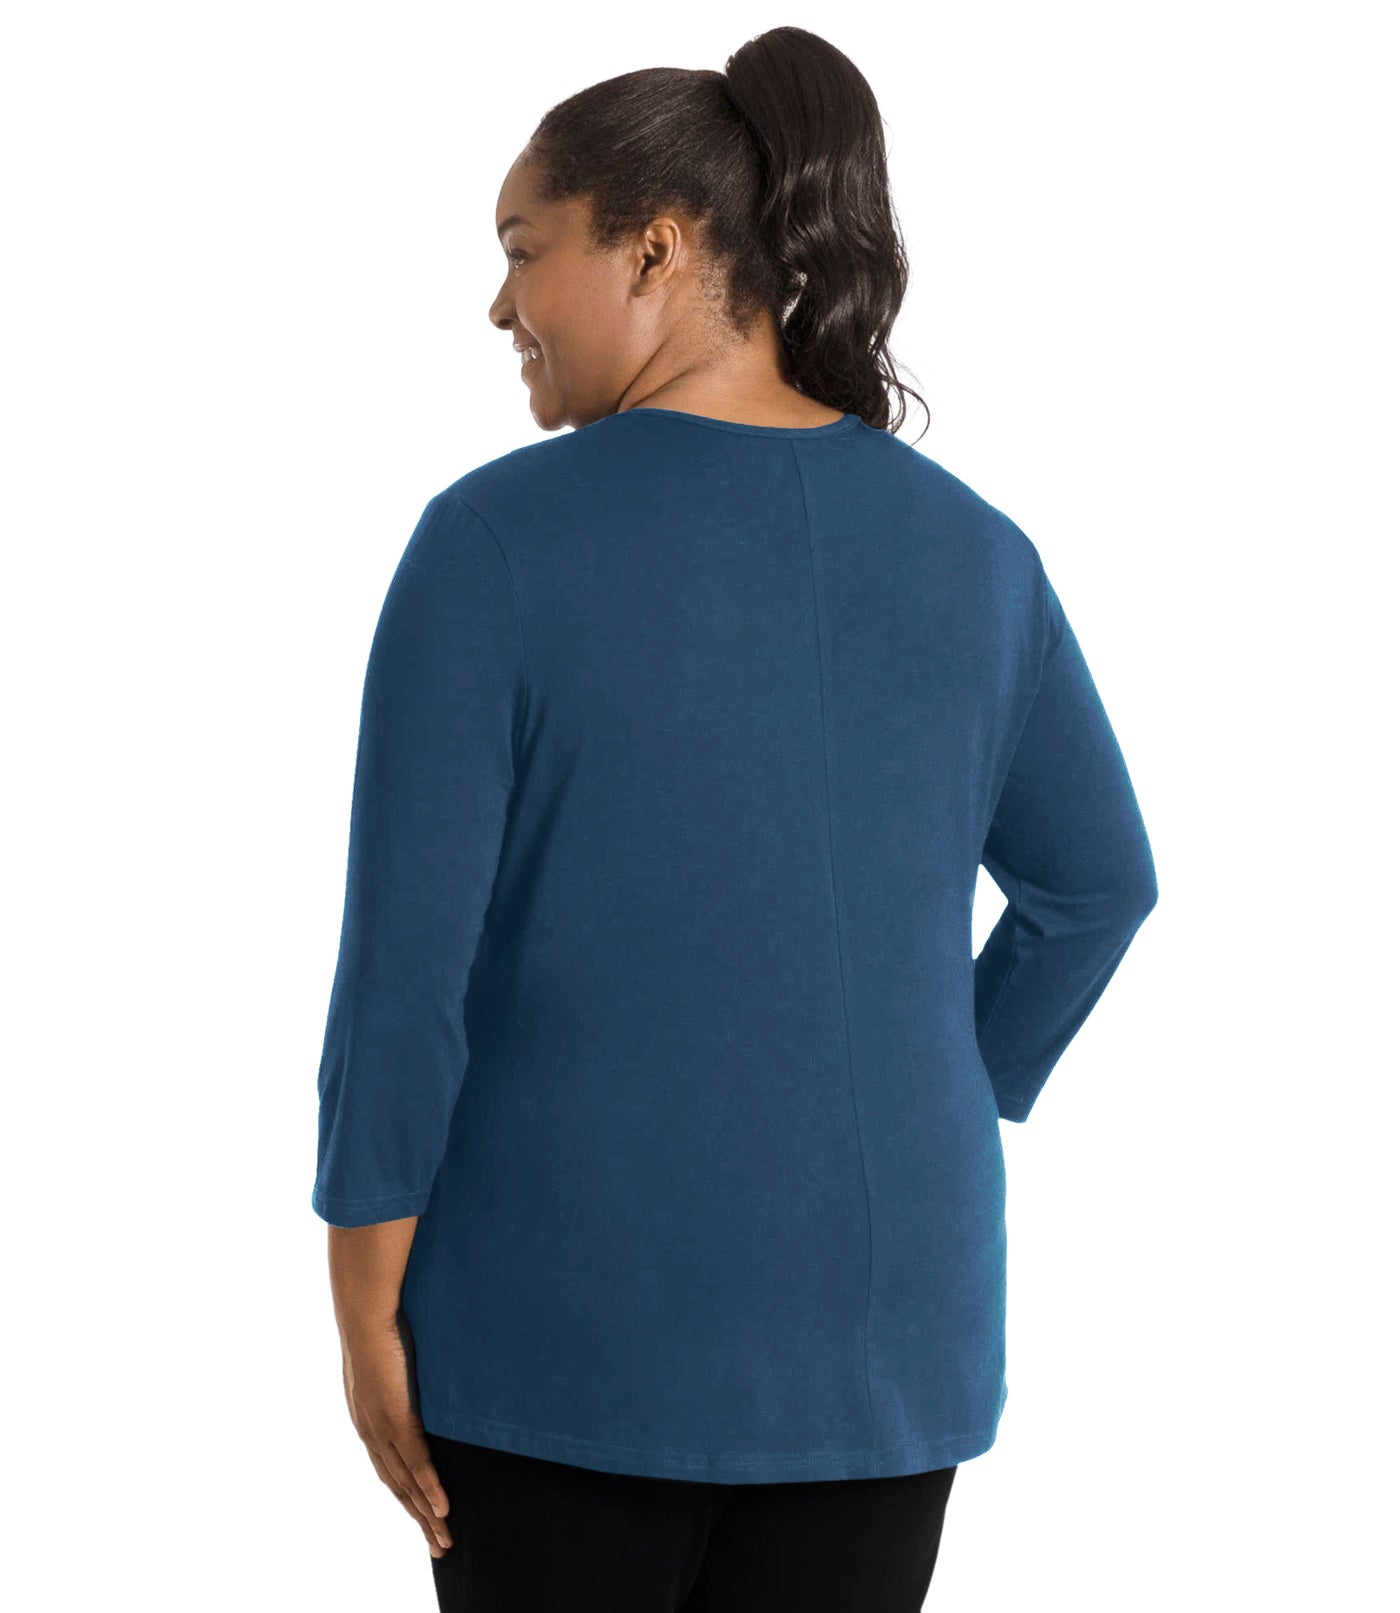 Plus size woman, facing back, wearing JunoActive’s Stretch Naturals Center Seam Scoop Neck 3/4 sleeve top in color denim blue. Hands are by side. Pants are in color black. 